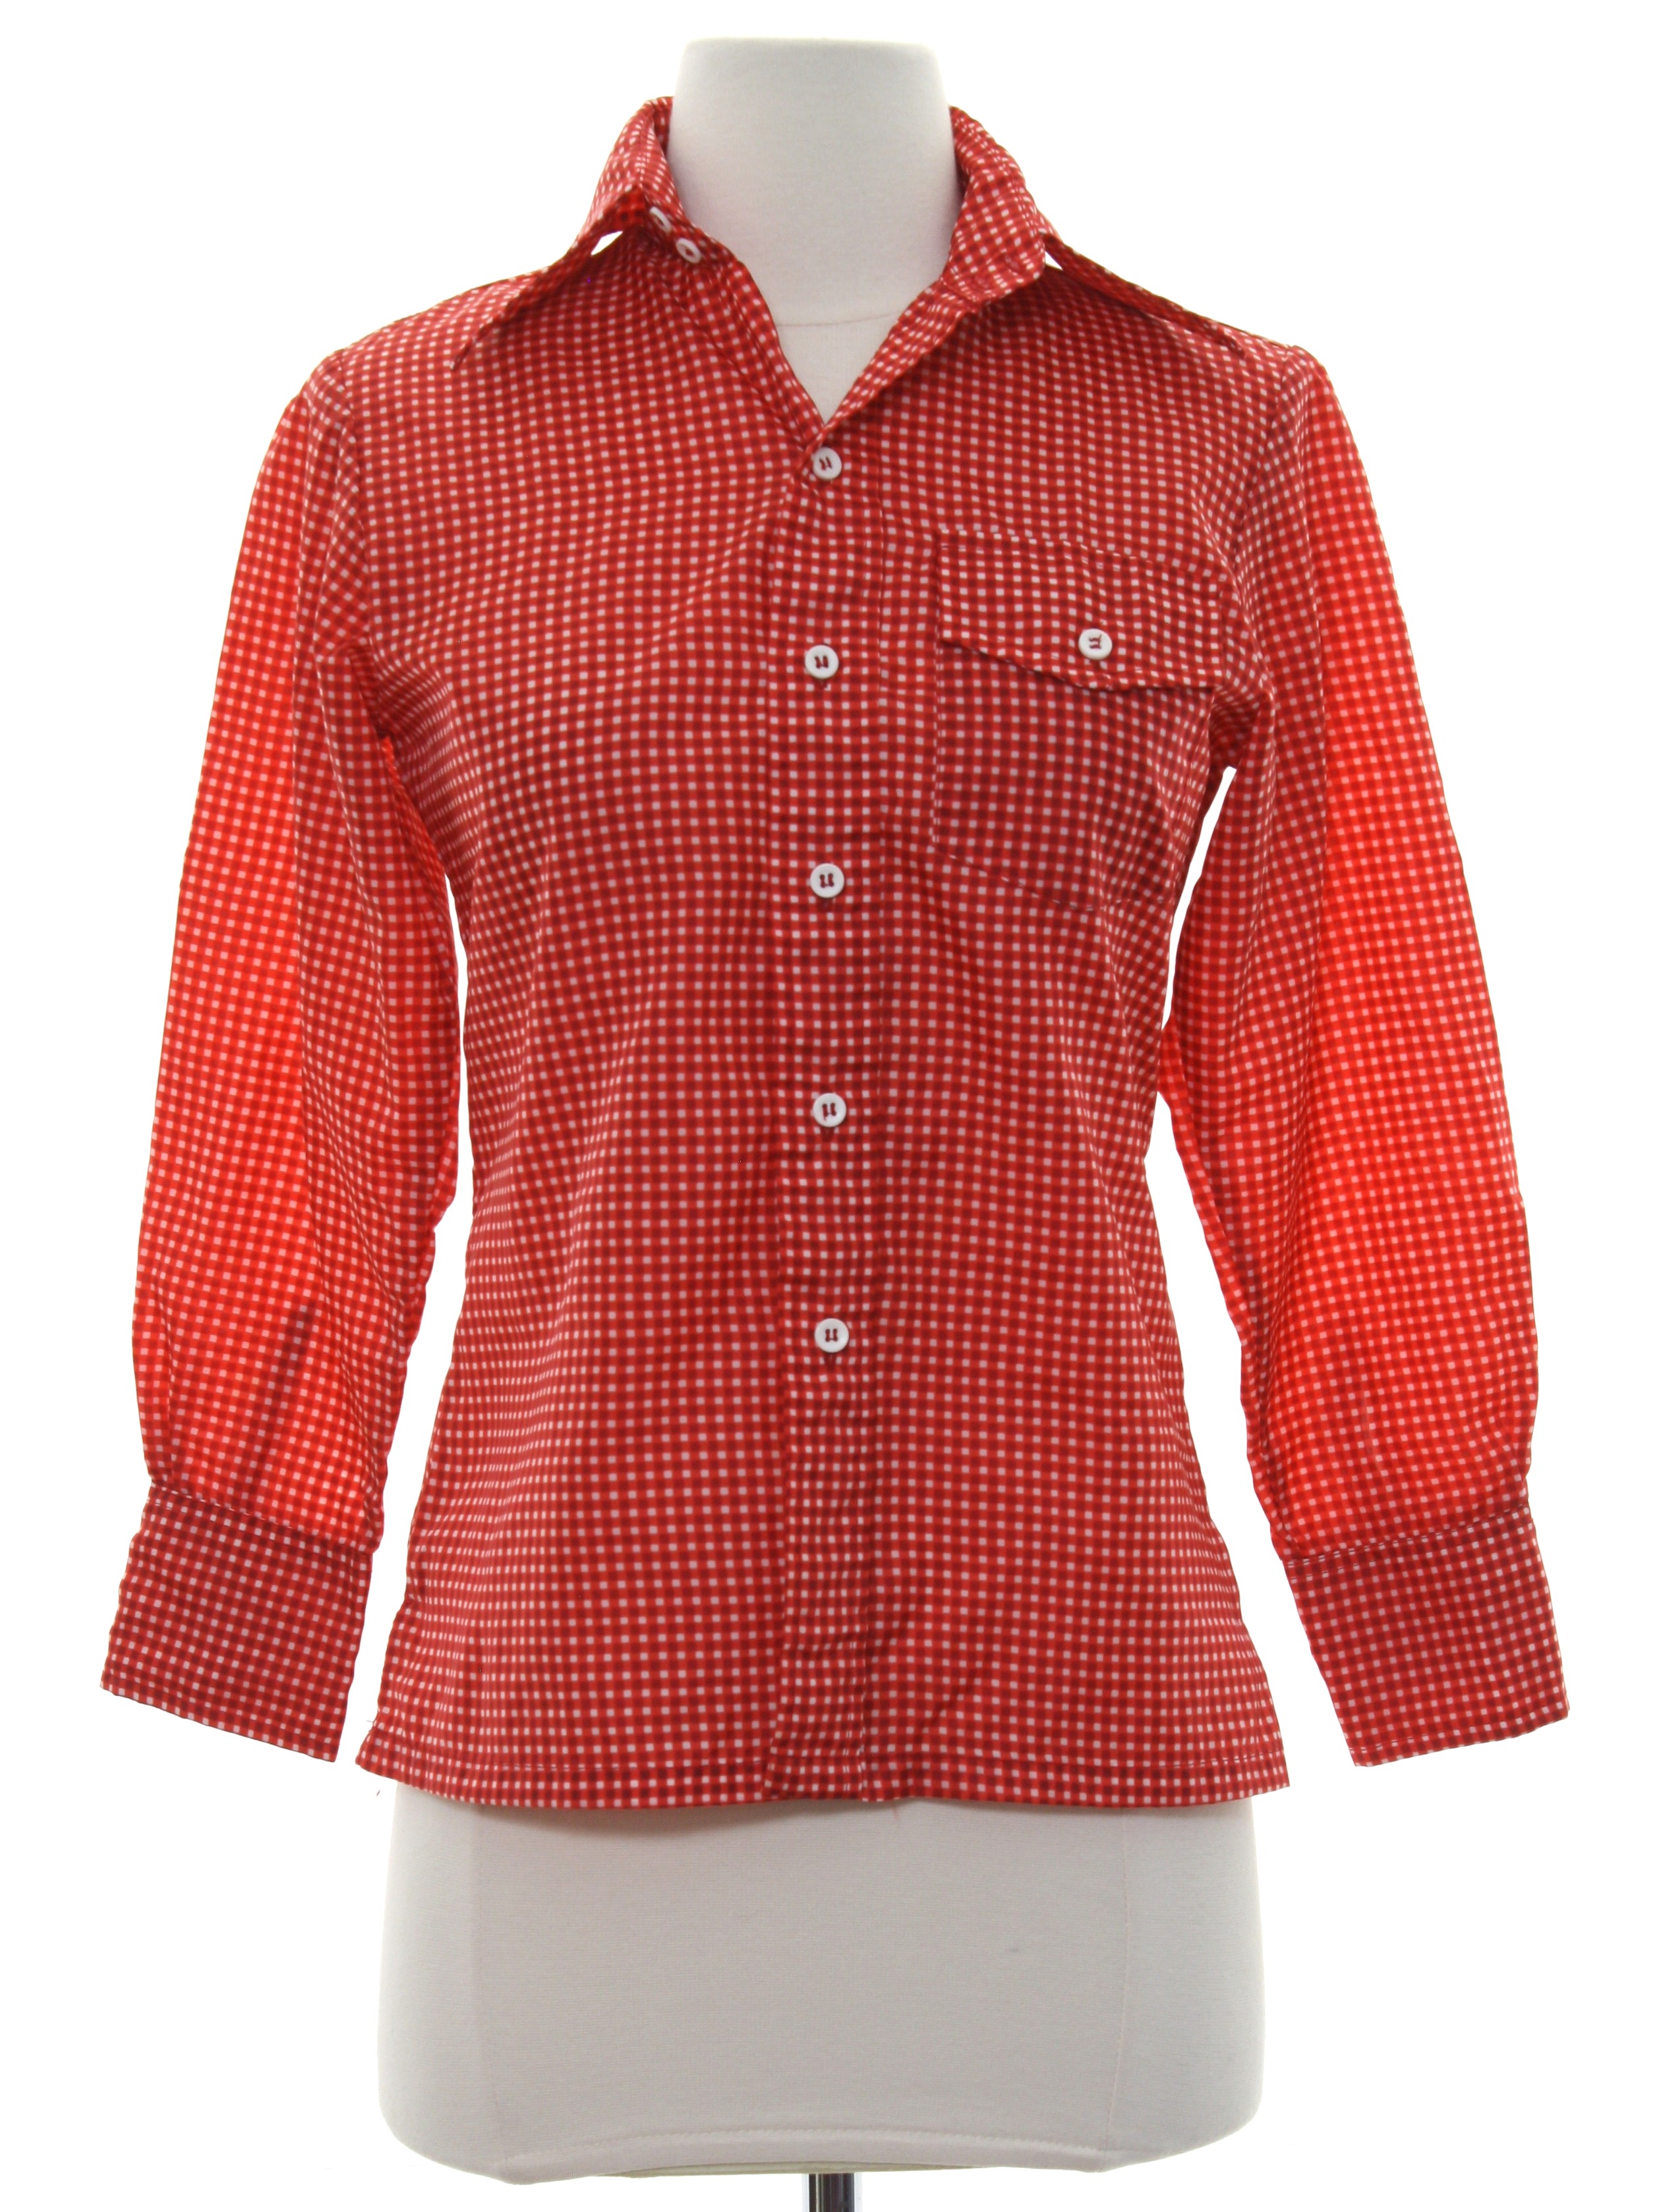 Vintage 70s Shirt: Late 70s or Early 80s -SKYR- Womens/Girls red, brick ...